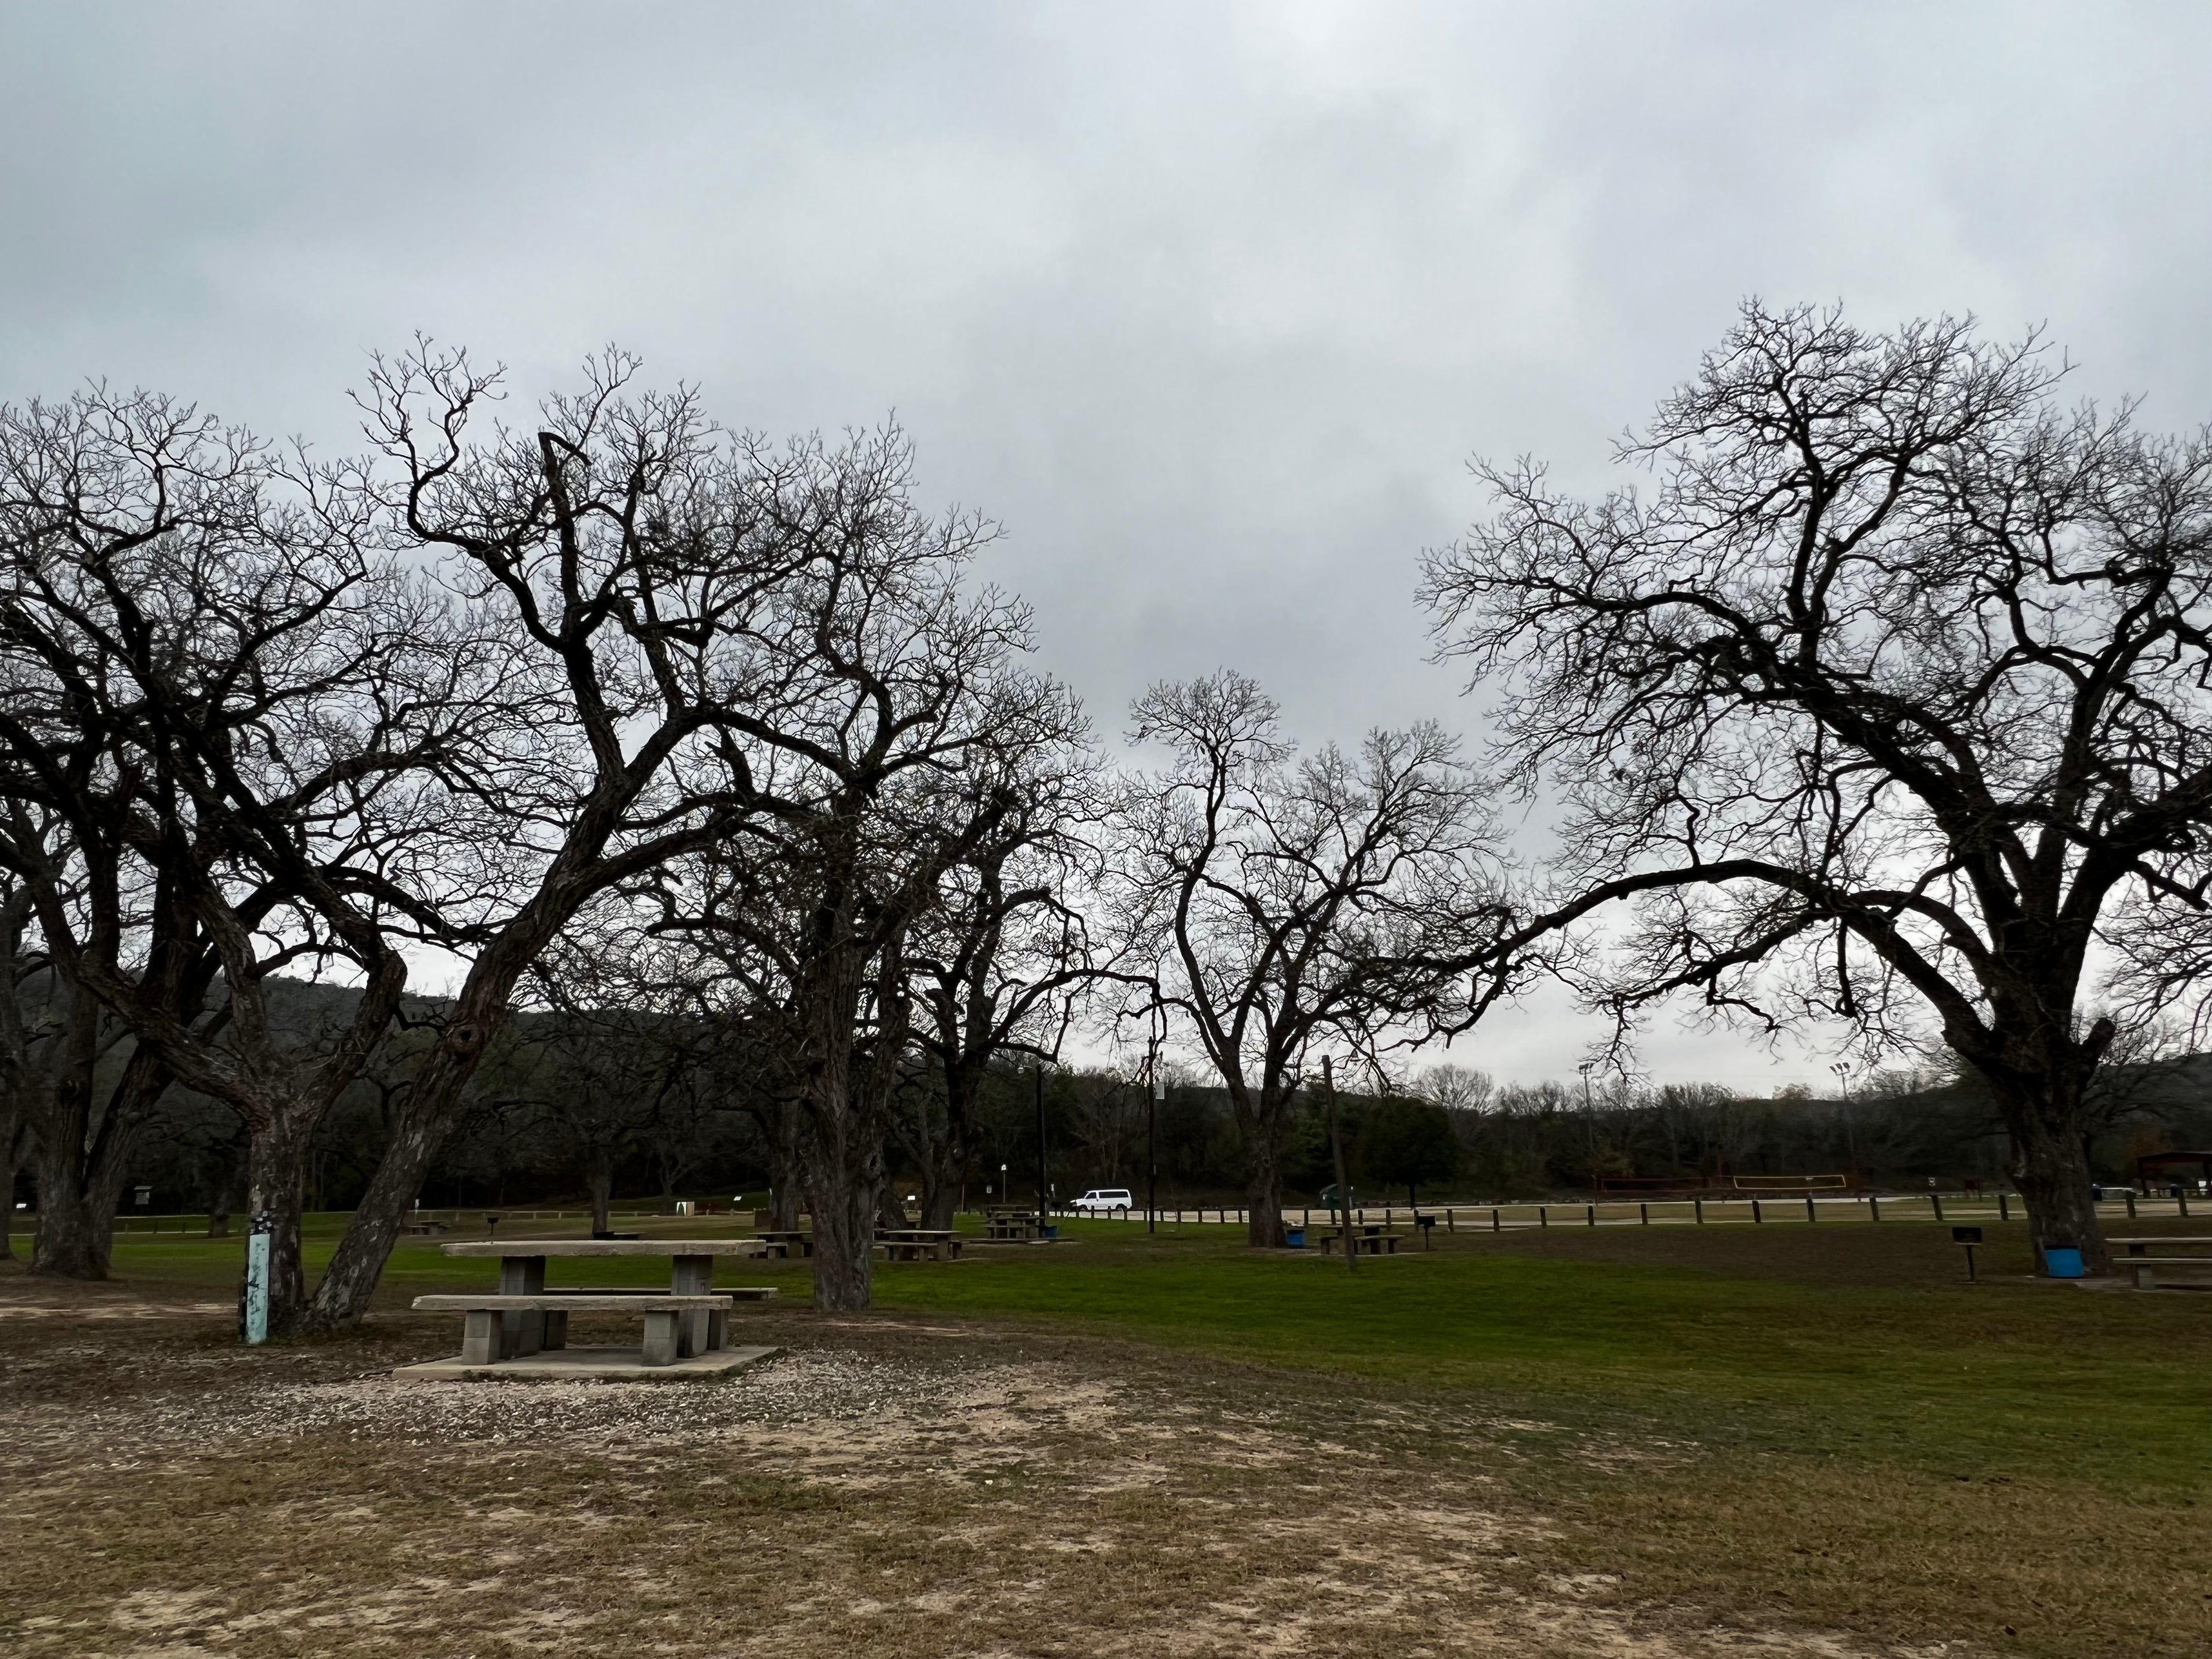 Camper submitted image from Castroville Regional Park - 5